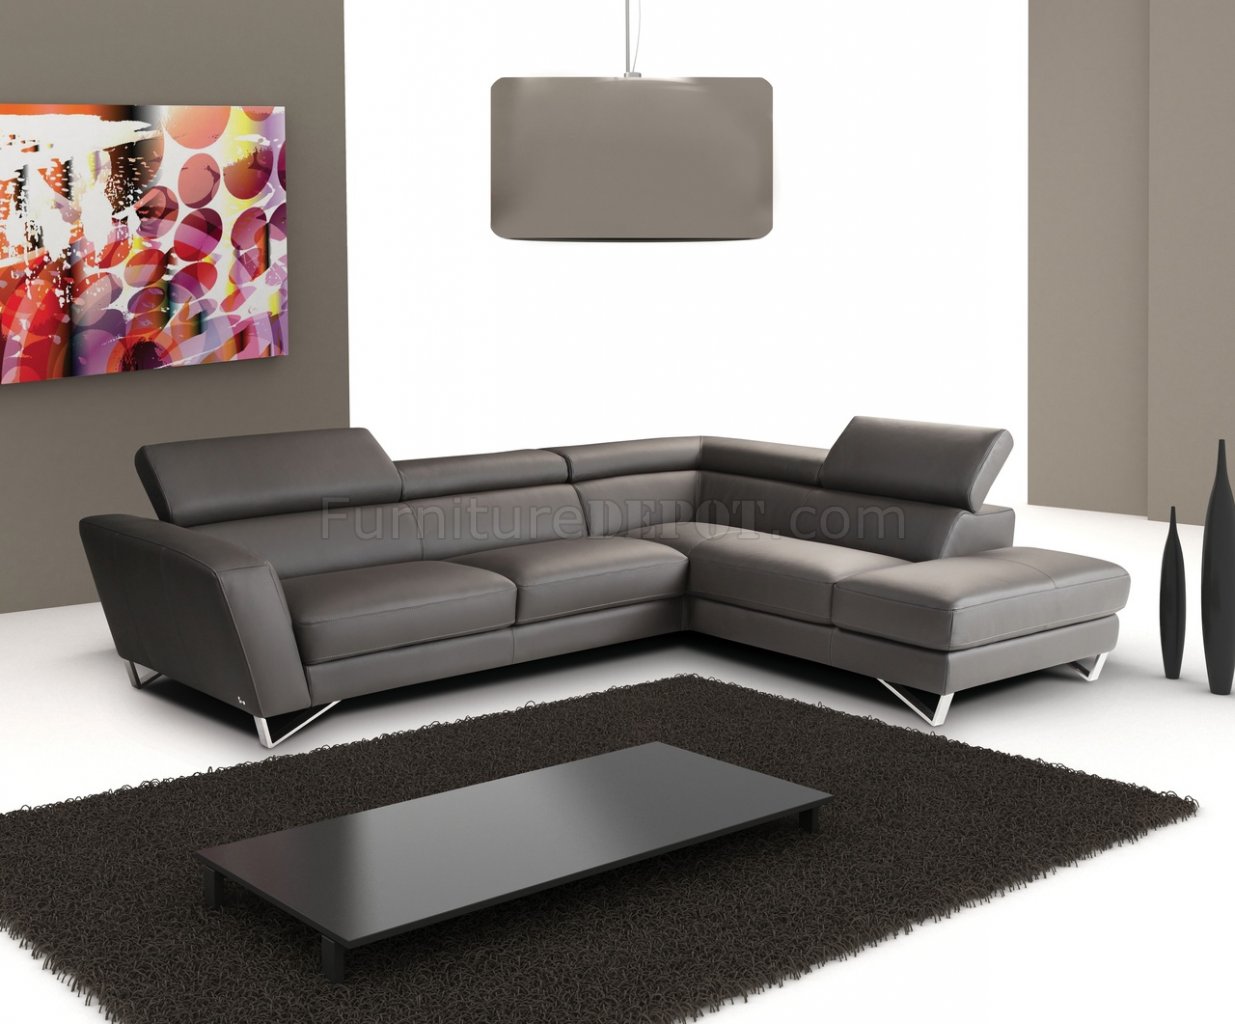 Full Leather Modern Sectional Sofa, Full Leather Sectional